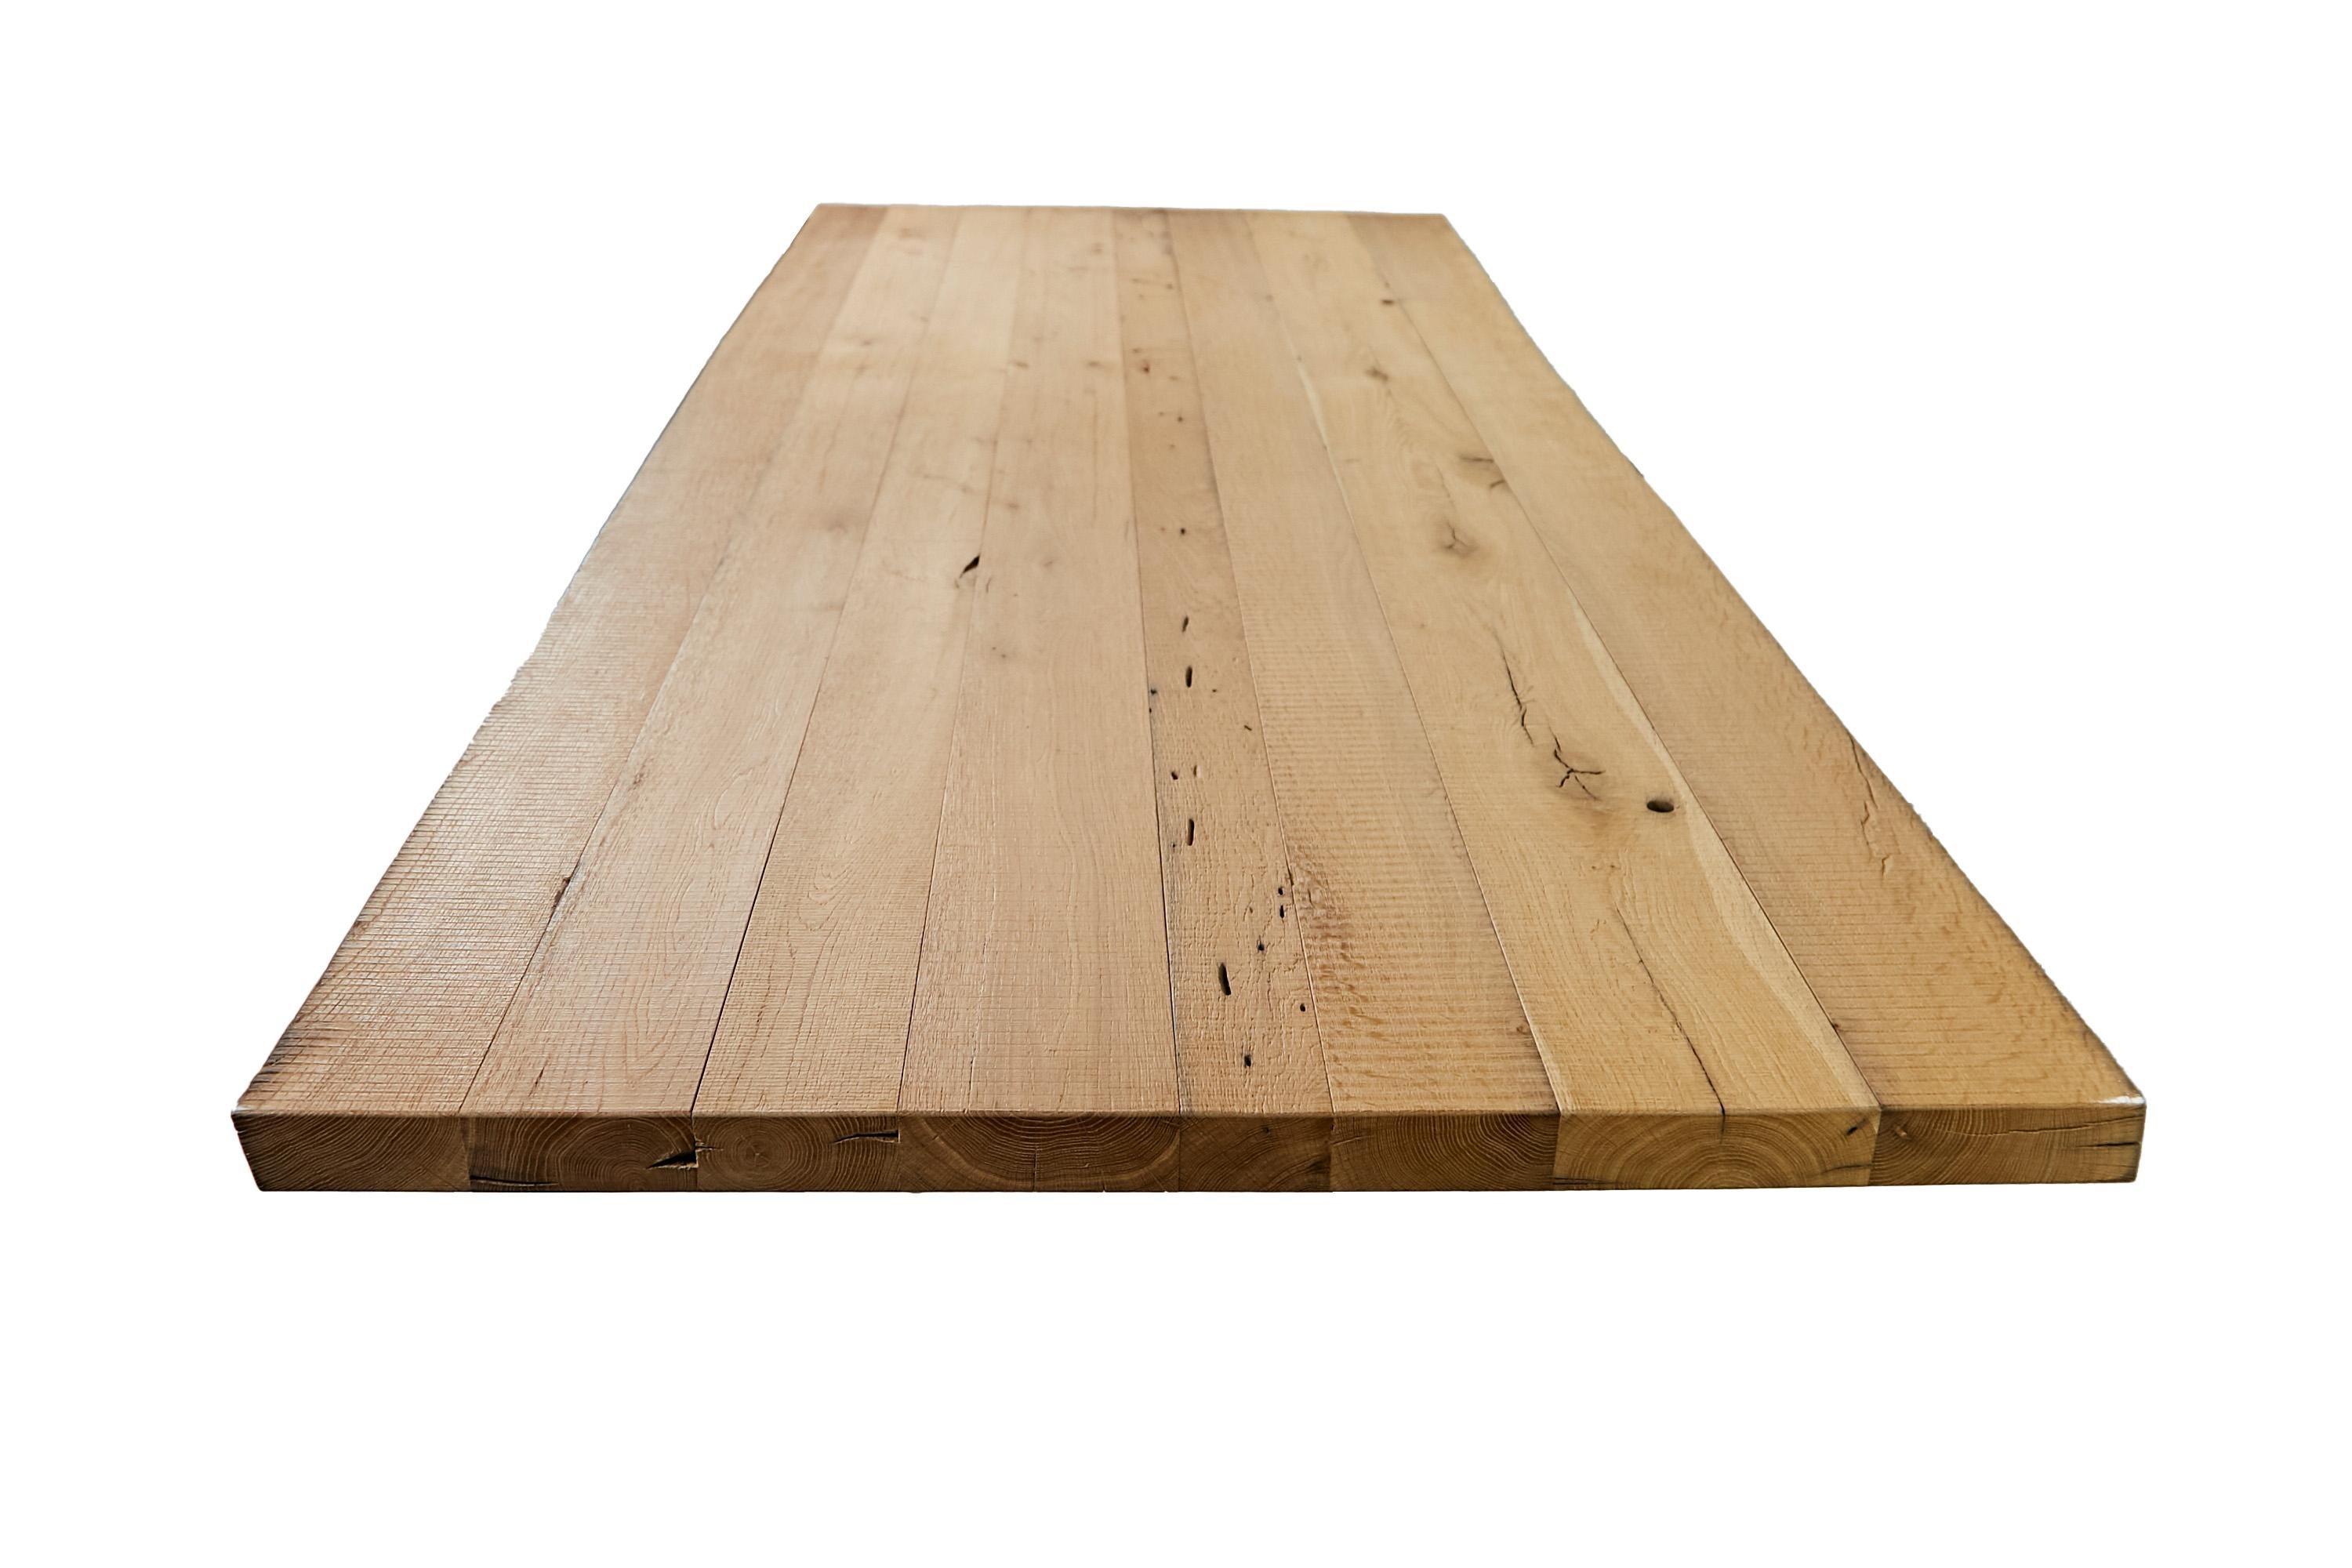 German Beautiful rough table top made of reclaimed oak wood For Sale